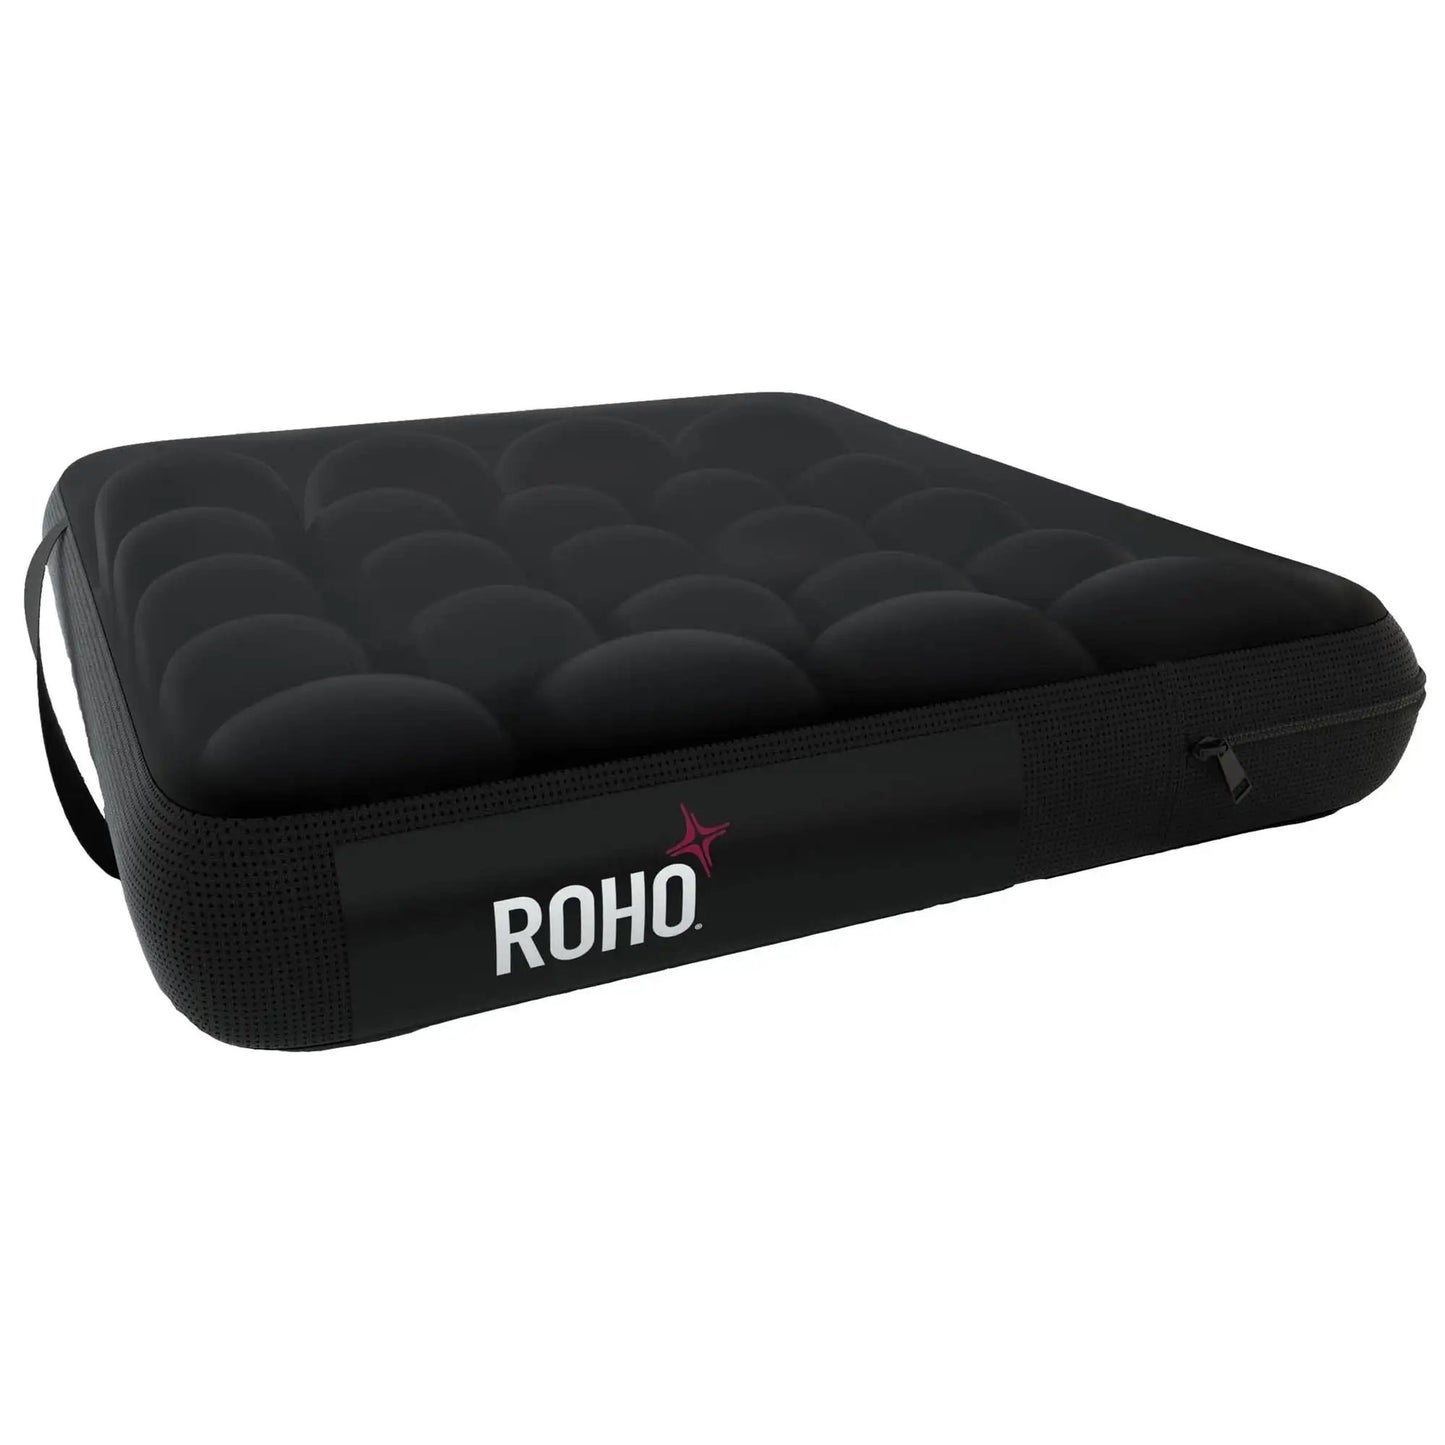 ROHO Mosaic Seat Cushion, 18 in. W x 16 in. D x 3 in. H, Air Cells, Black, Inflatable